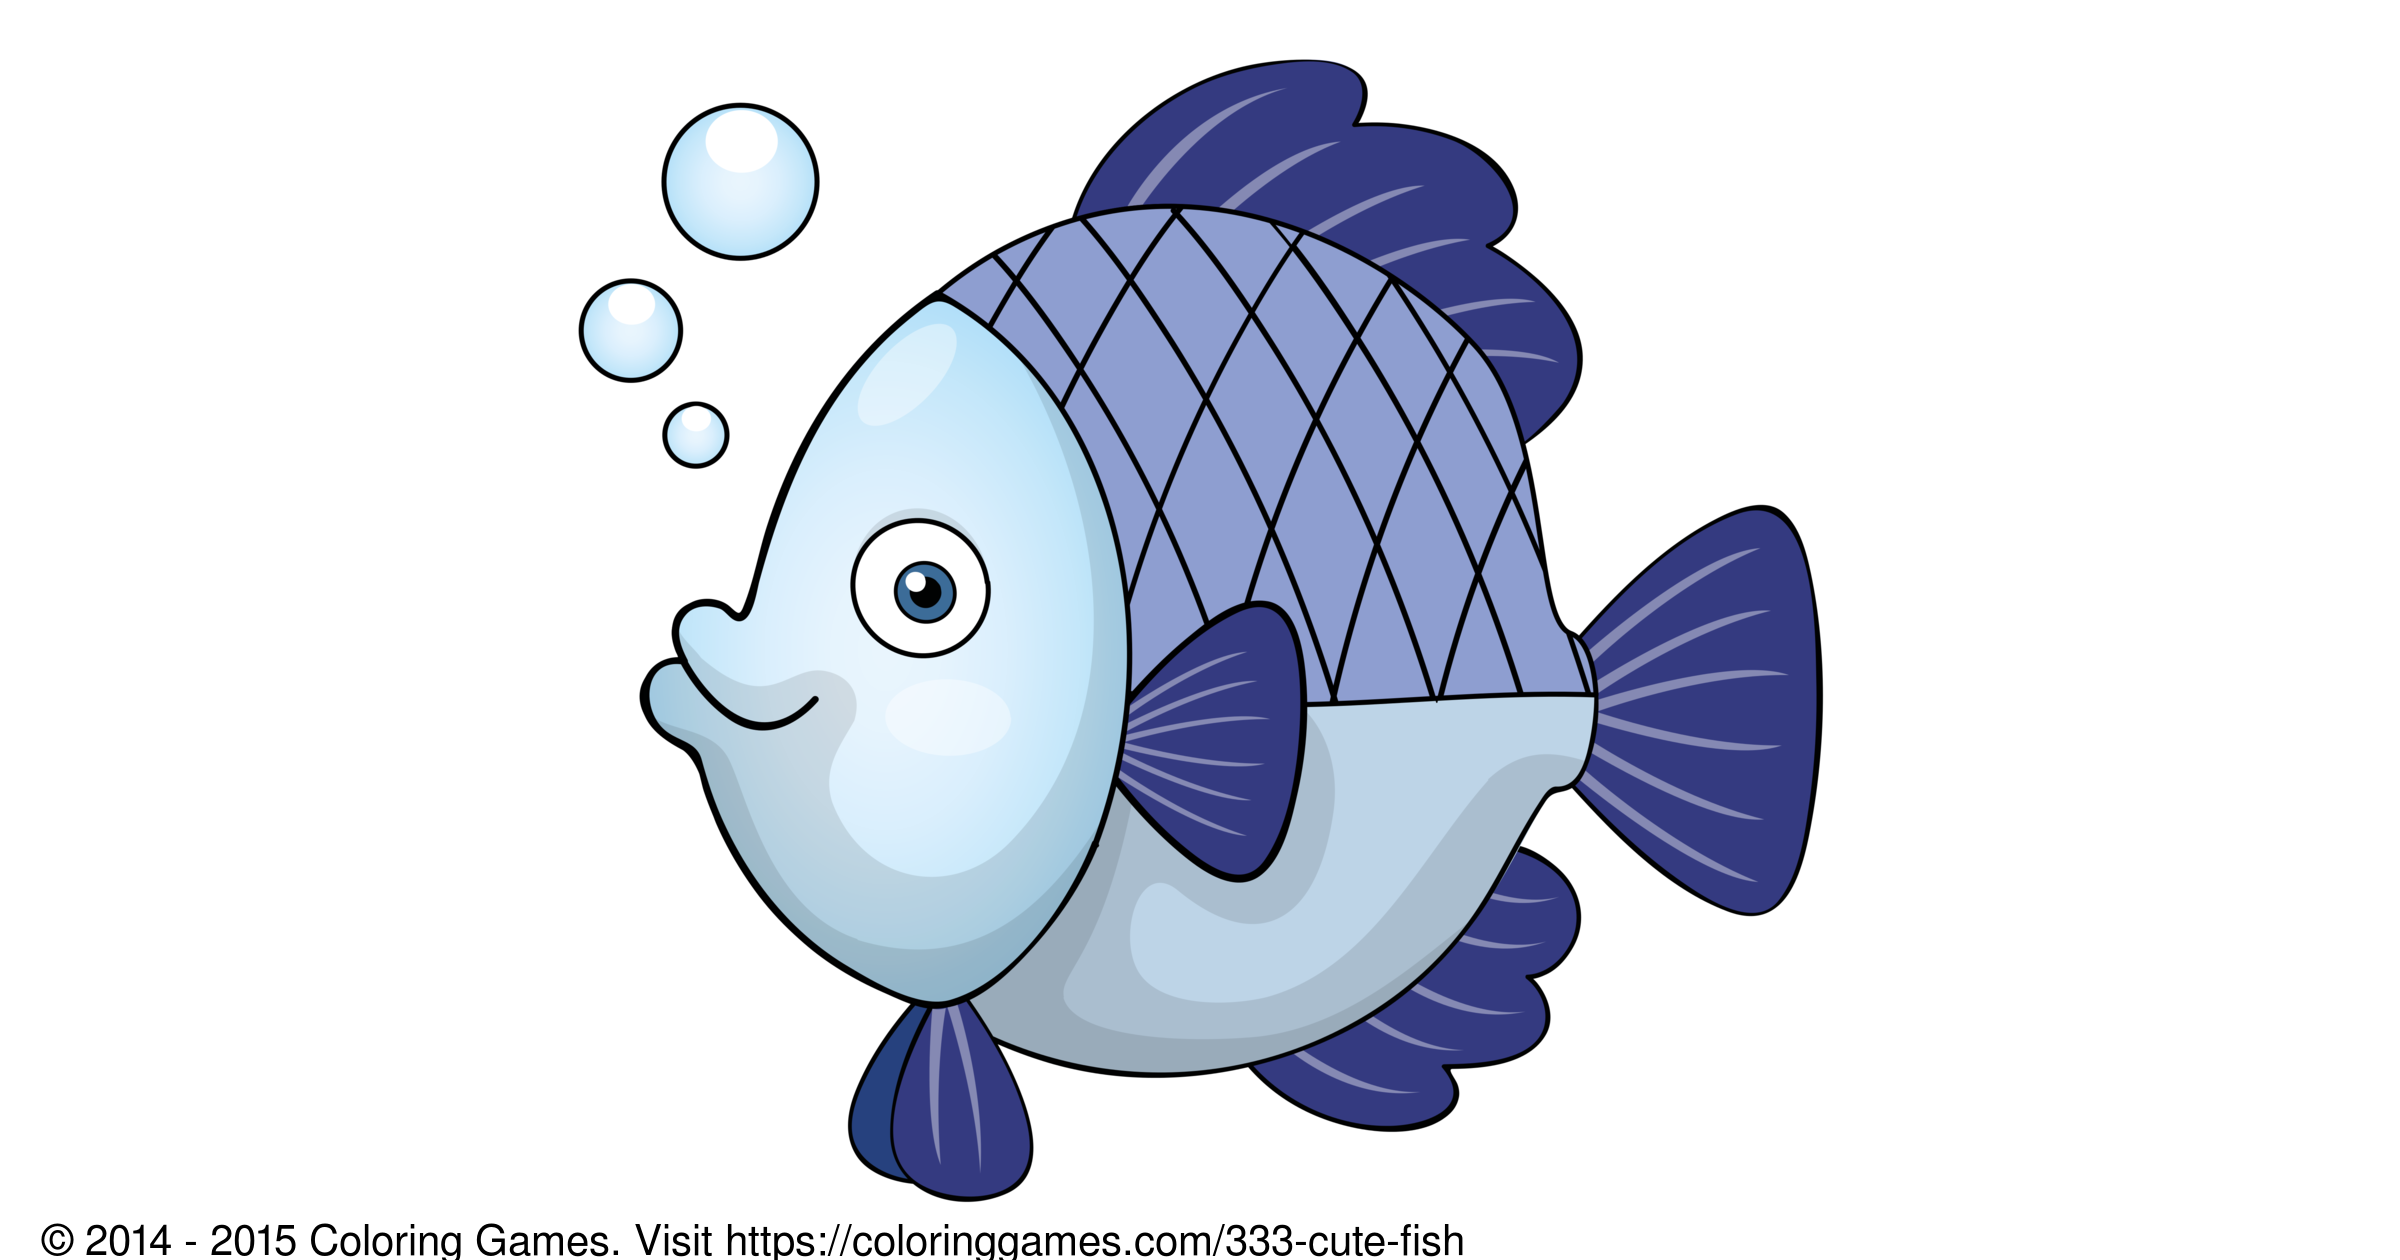 Cute fish - Coloring Games and Coloring Pages